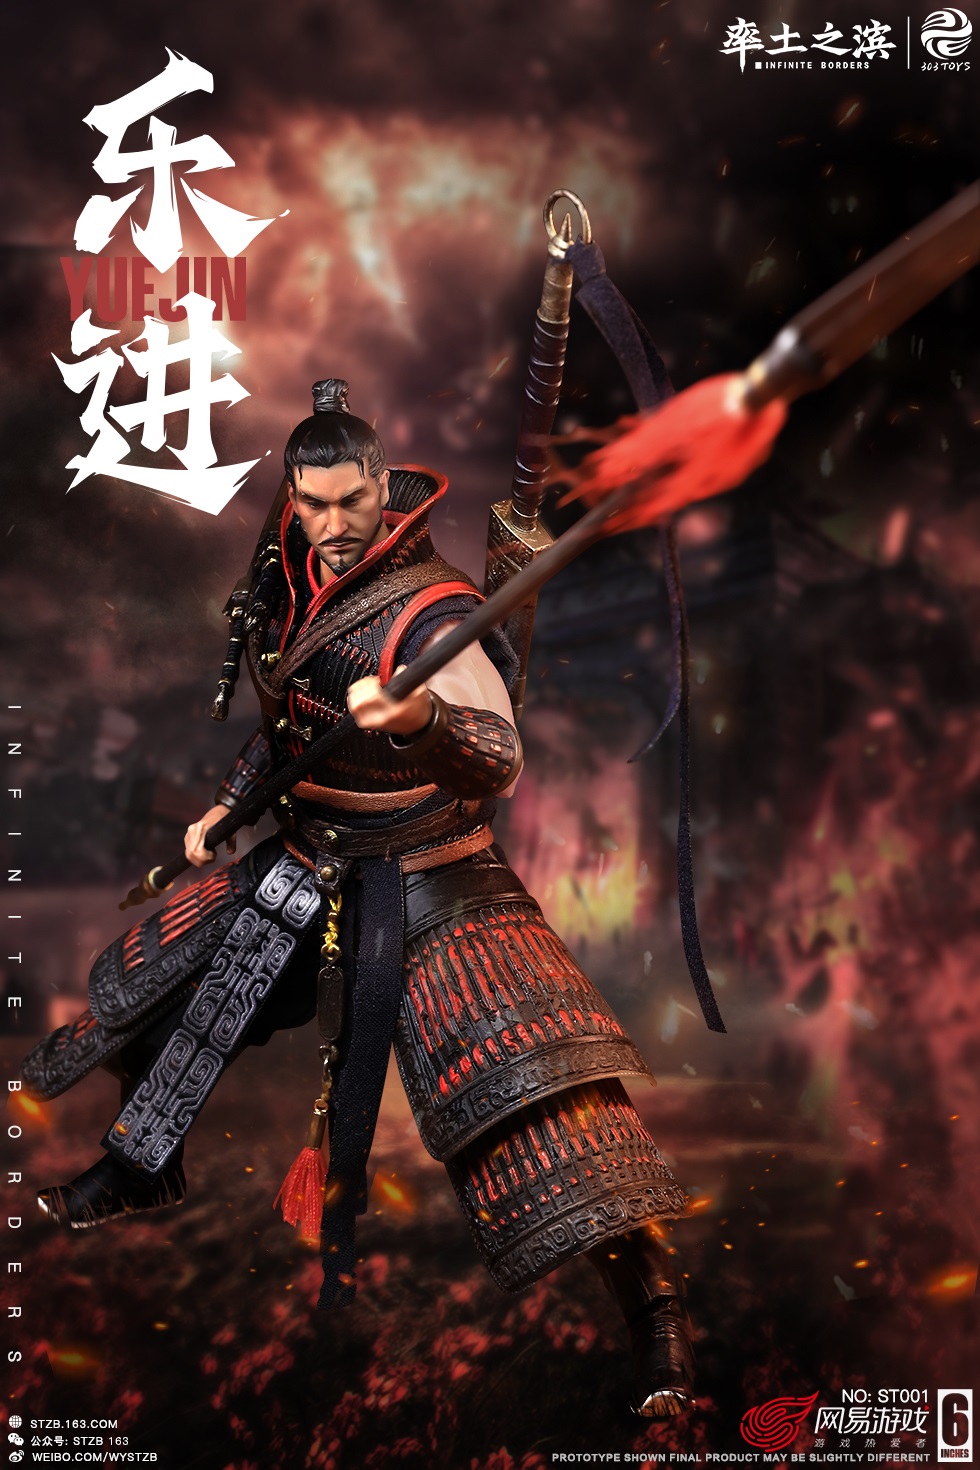 NEW PRODUCT: INFINITE BORDERS X 303TOYS 1/12 - The Five Sons of Elite Generals: Yue Jin ST001 03165